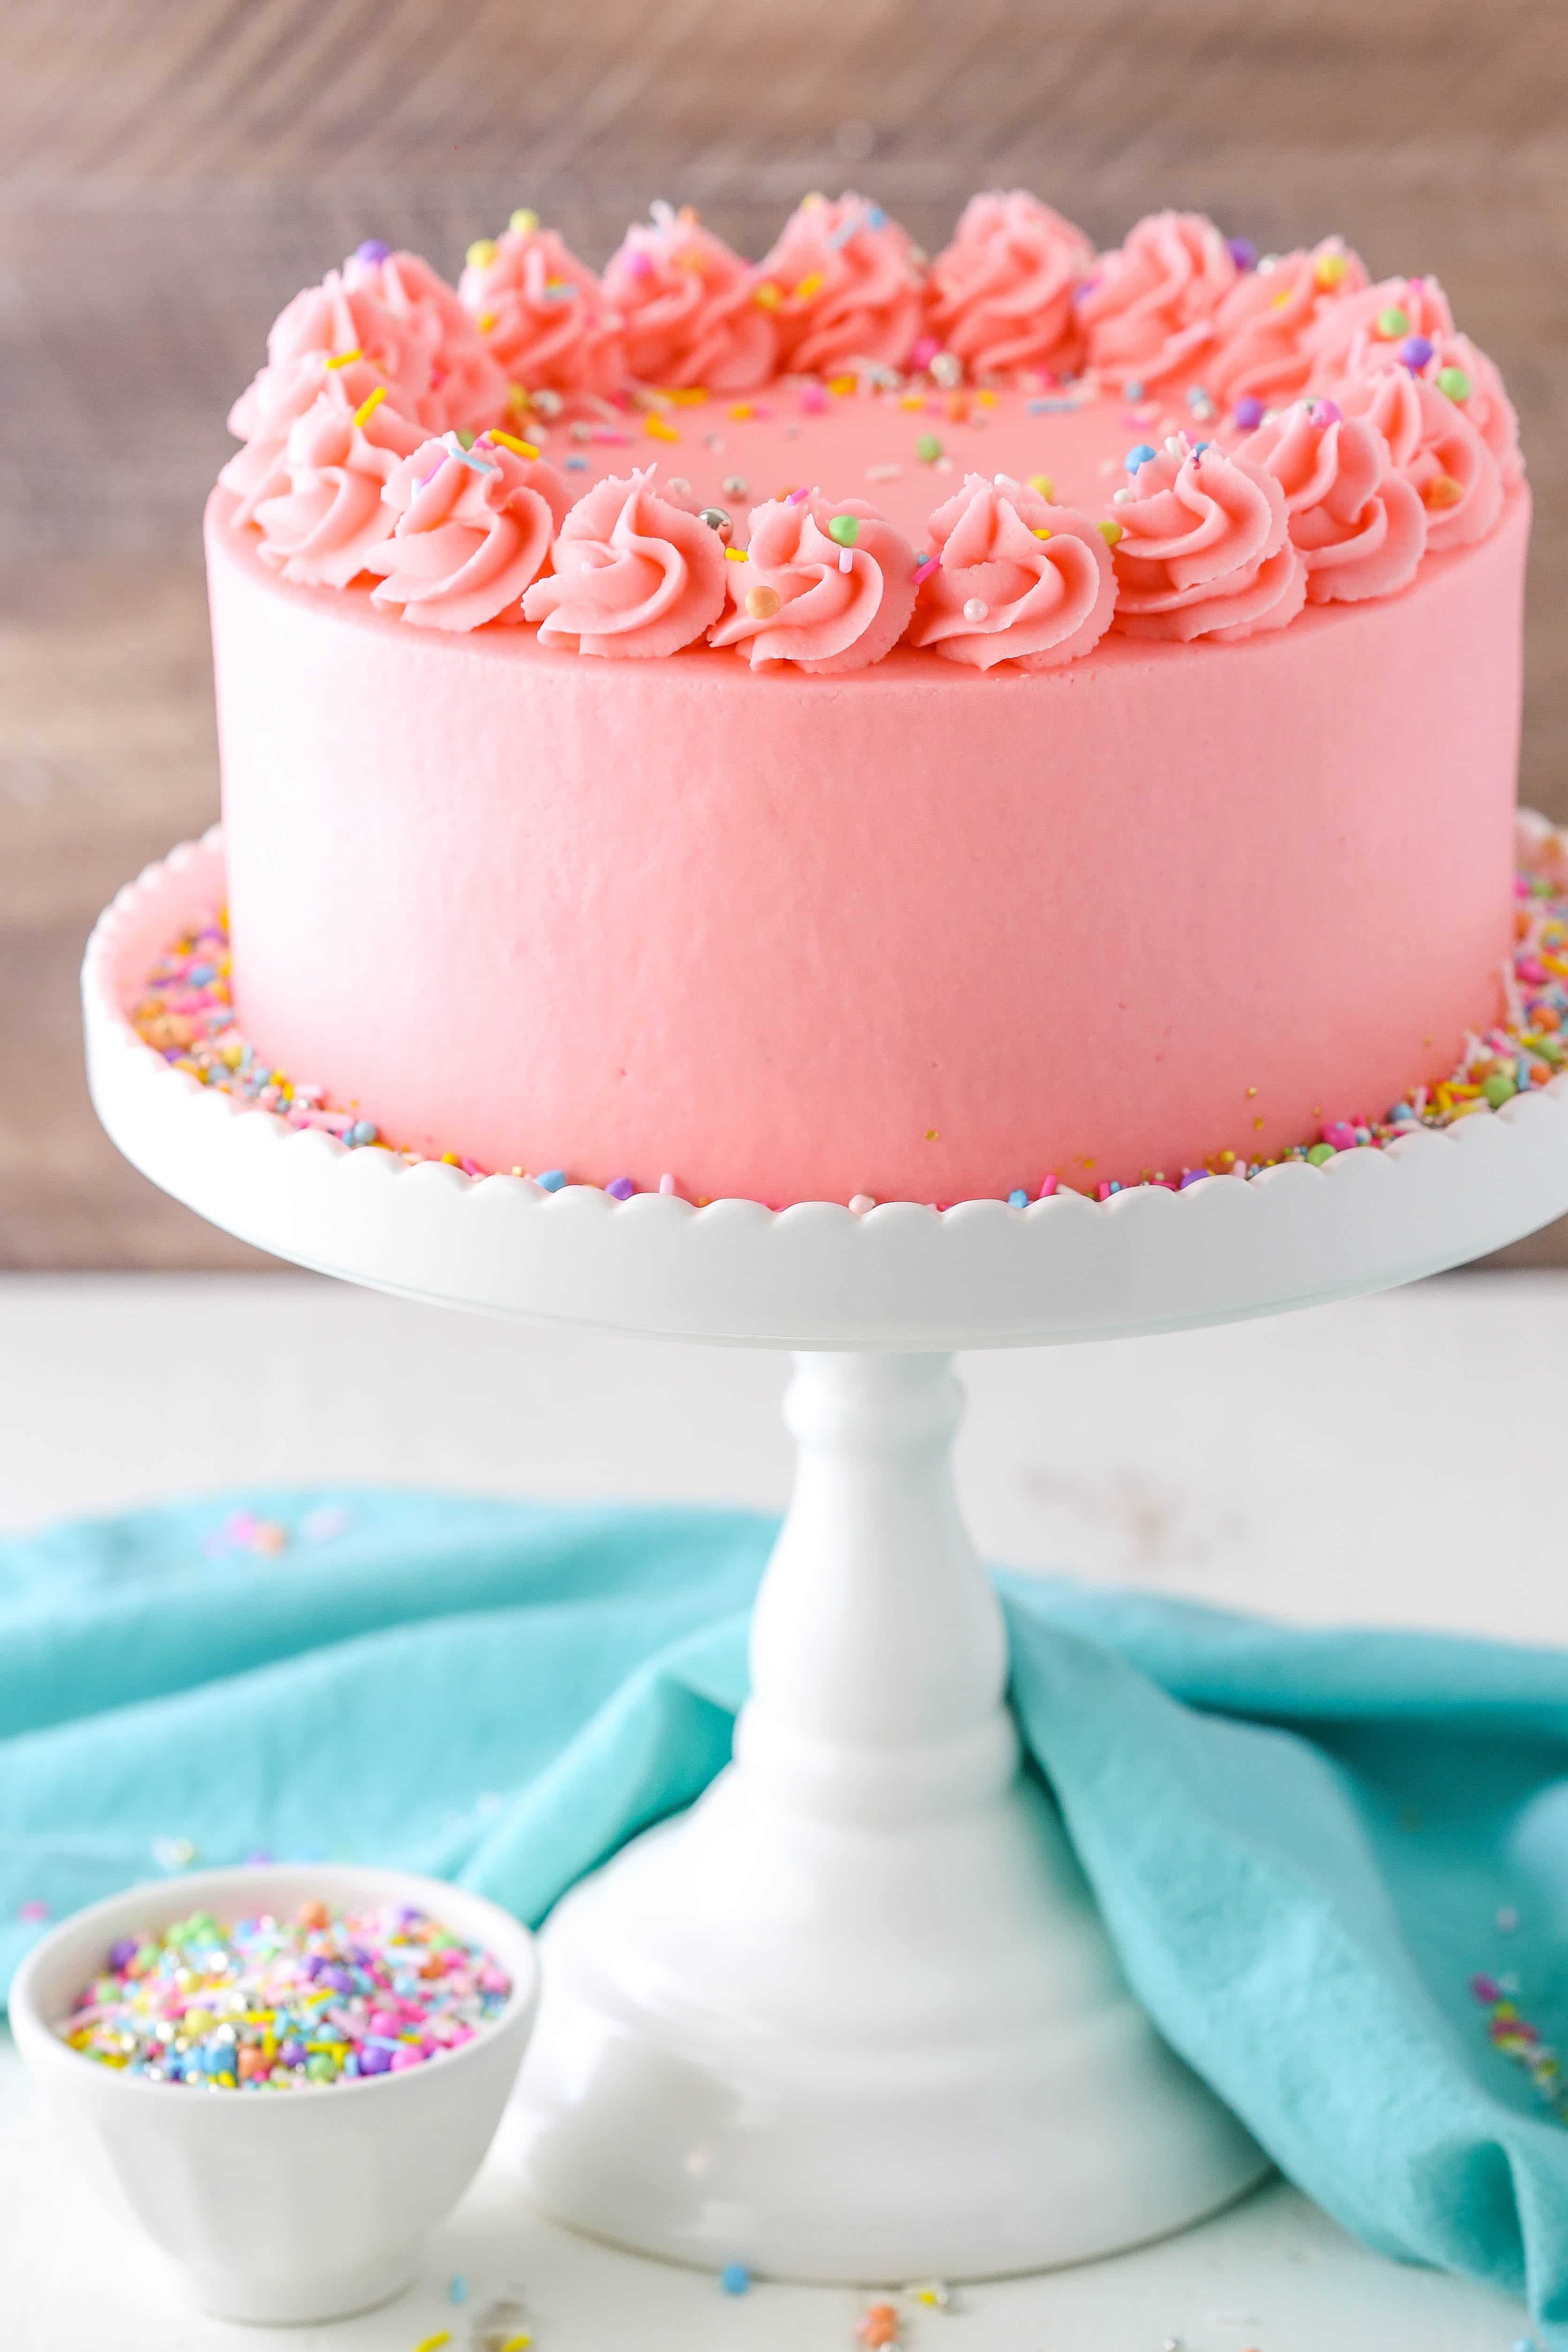 How to Frost a Cake with Buttercream - Step-by-Step Tutorial (Photos)